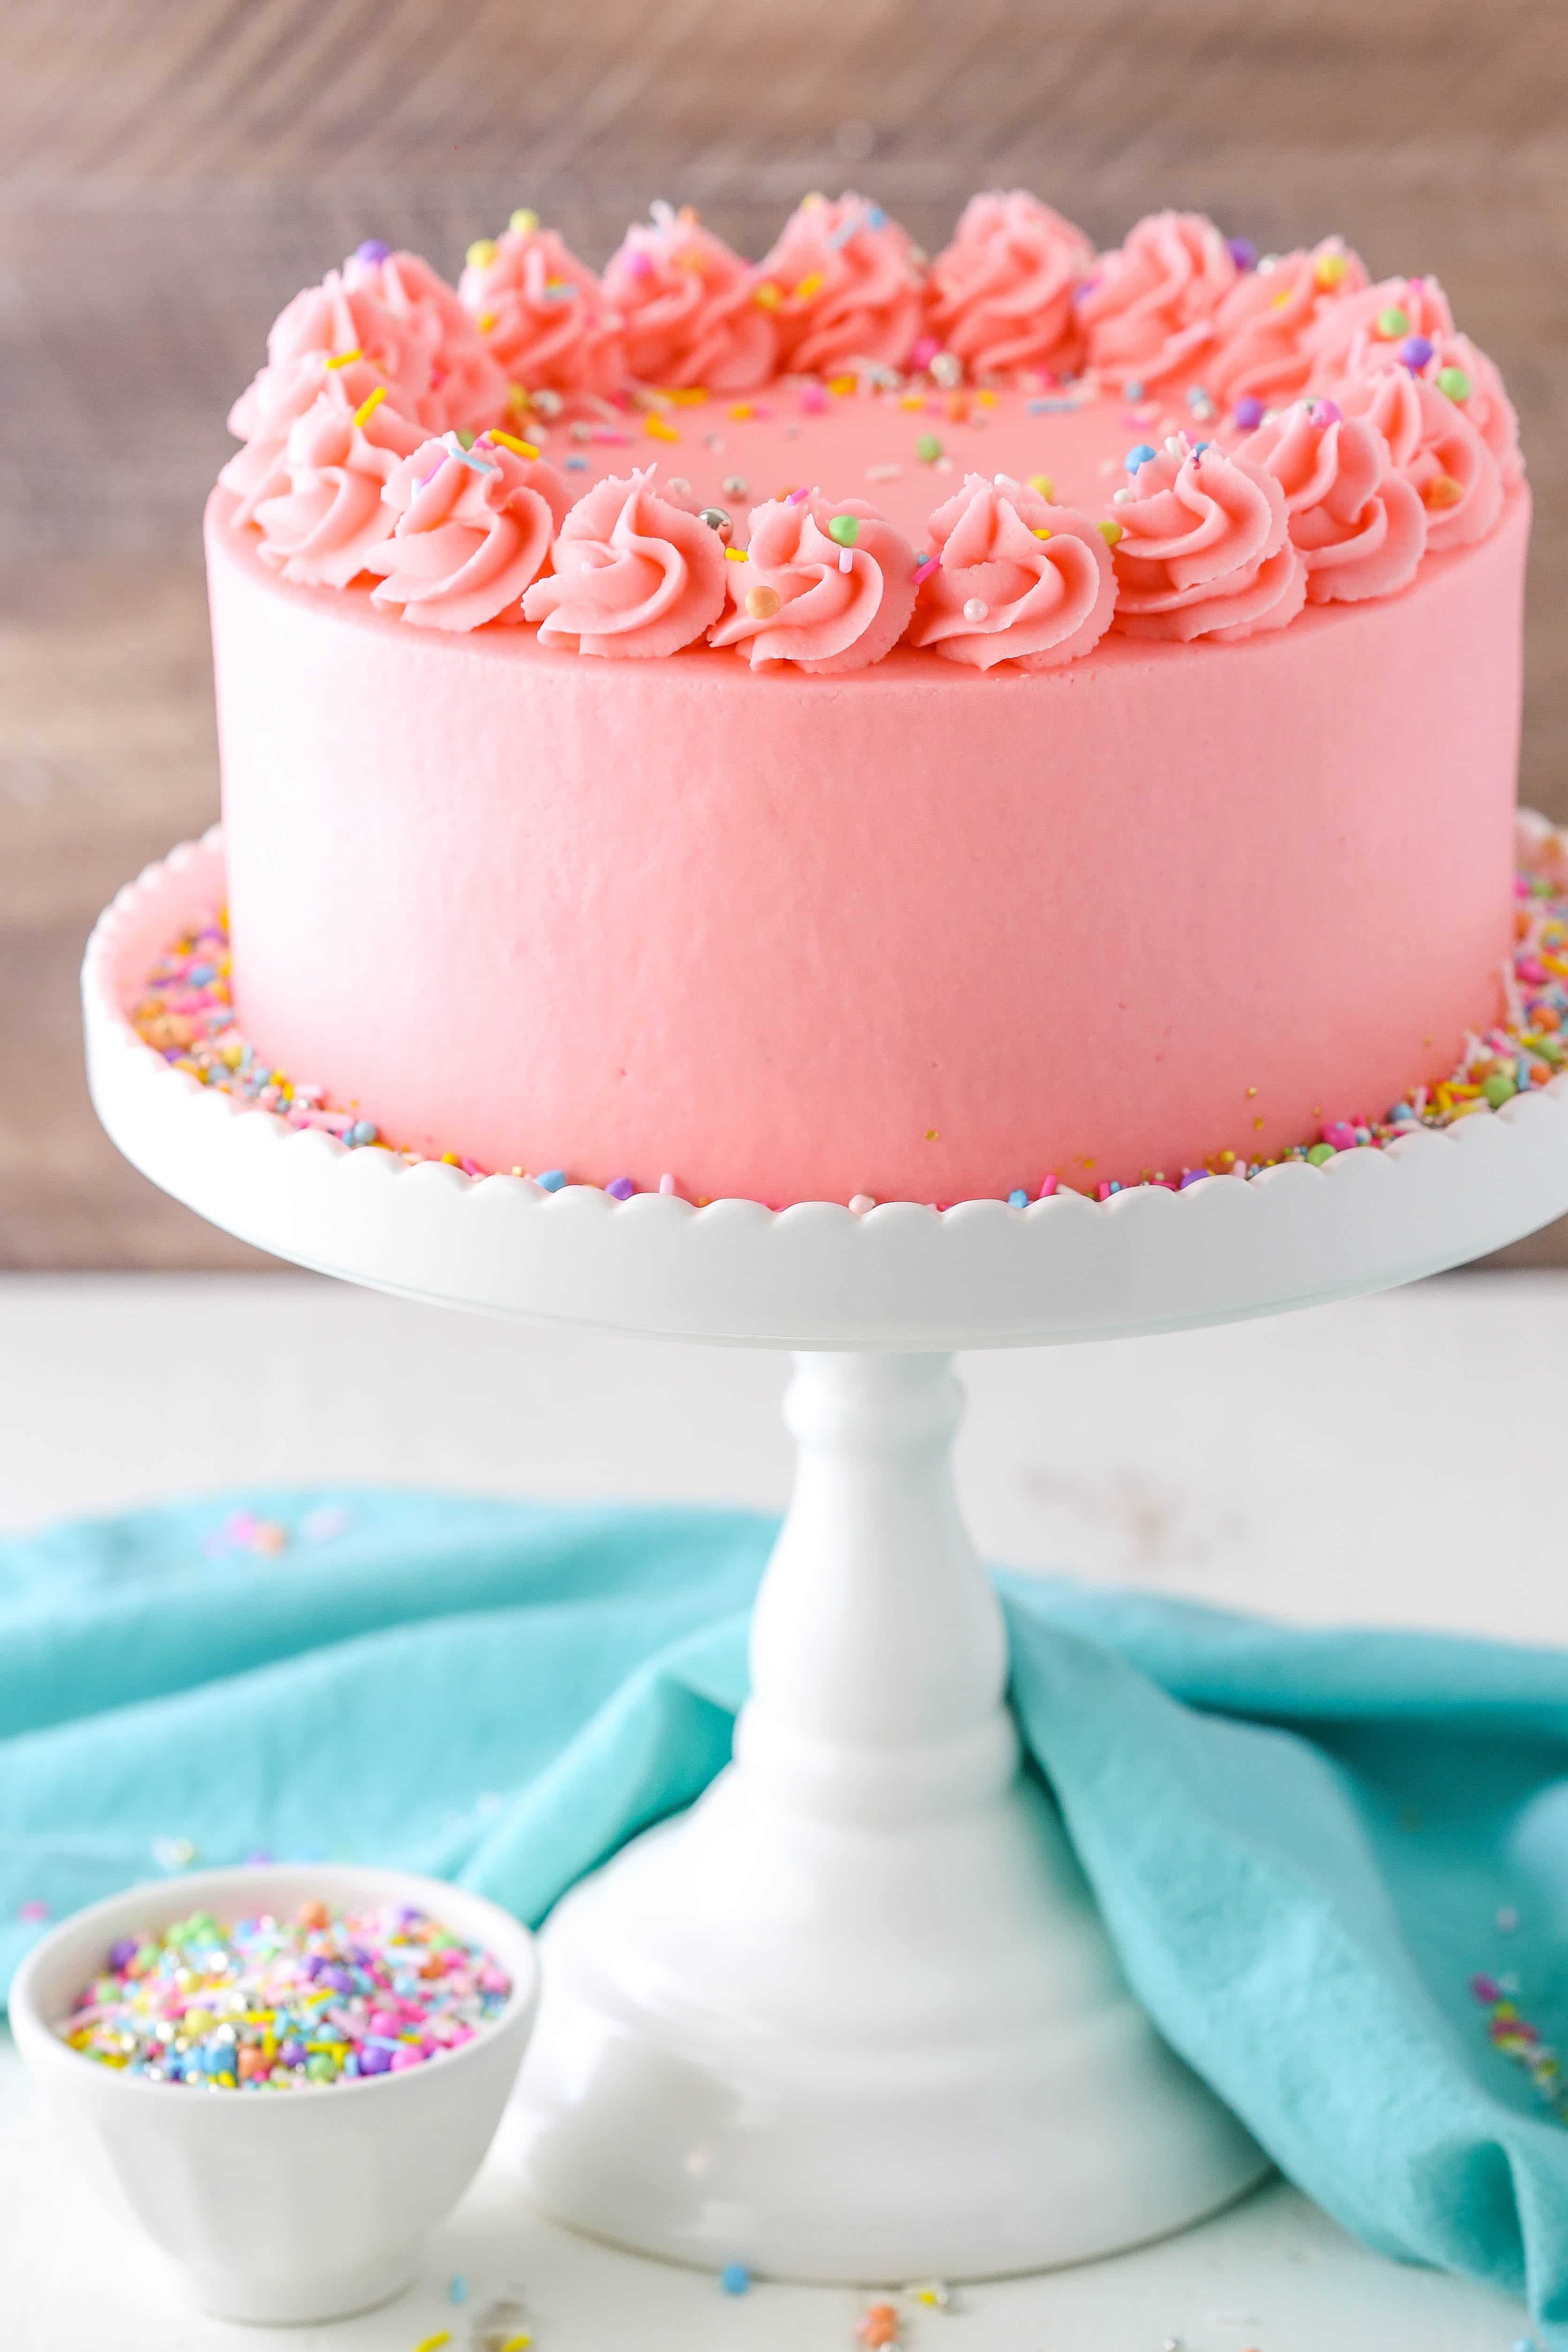 How to Frost a Cake with Buttercream - Step-by-Step Tutorial (Photos)